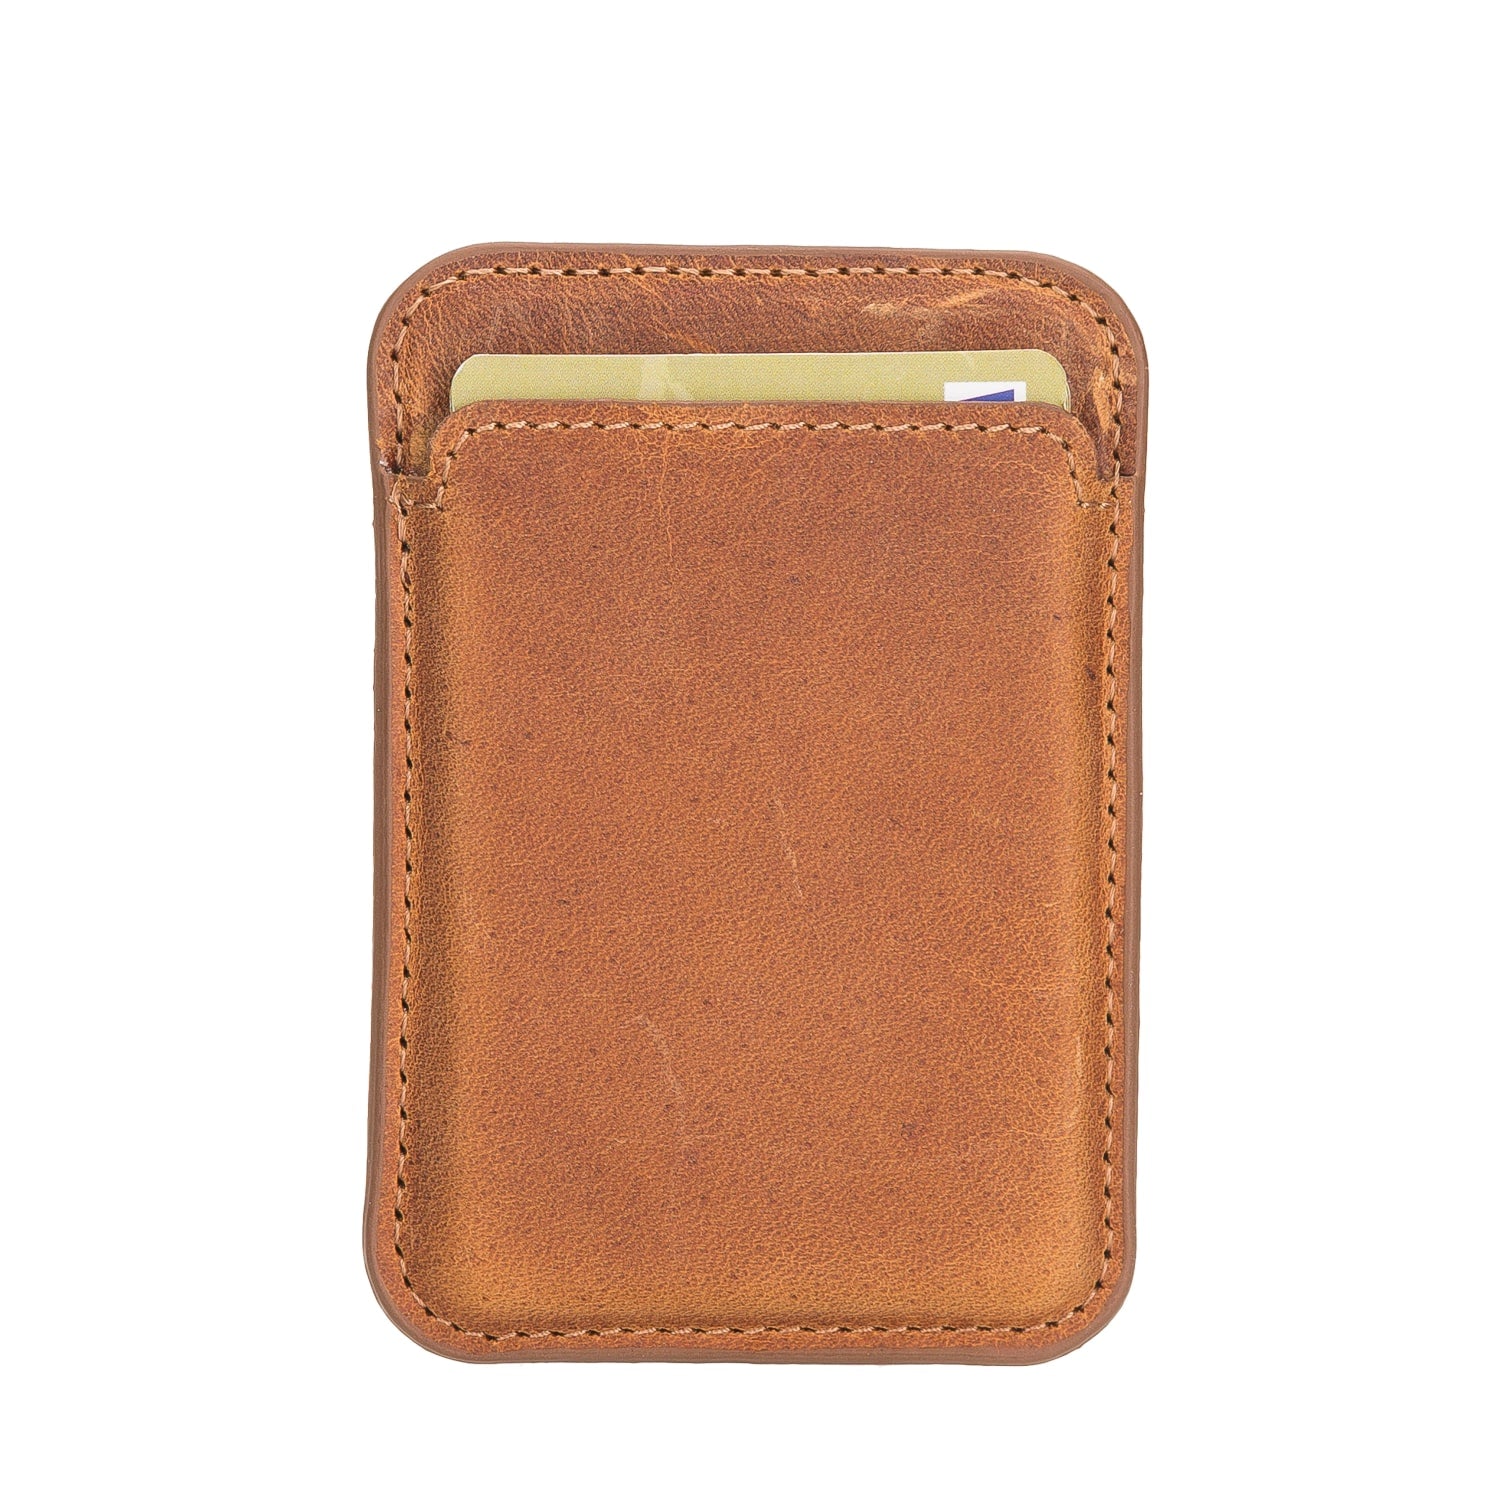 Golden Brown Leather Apple MagSafe Card Holder Magnetic Wallet for iPhone - Bomonti - 4